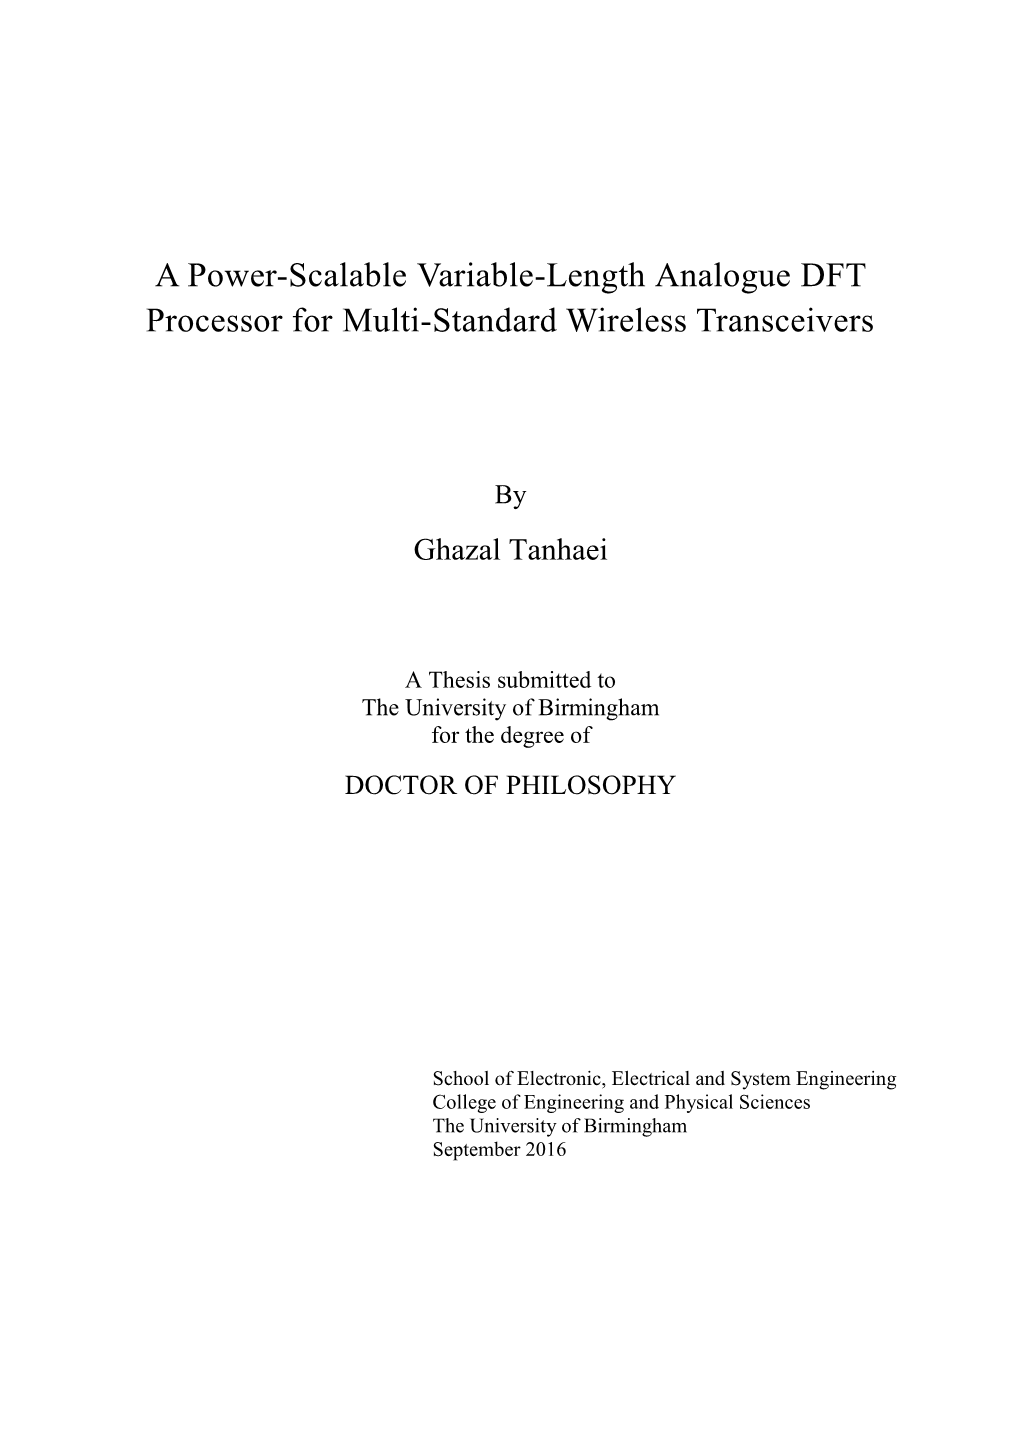 A Power-Scalable Variable-Length Analogue DFT Processor for Multi-Standard Wireless Transceivers